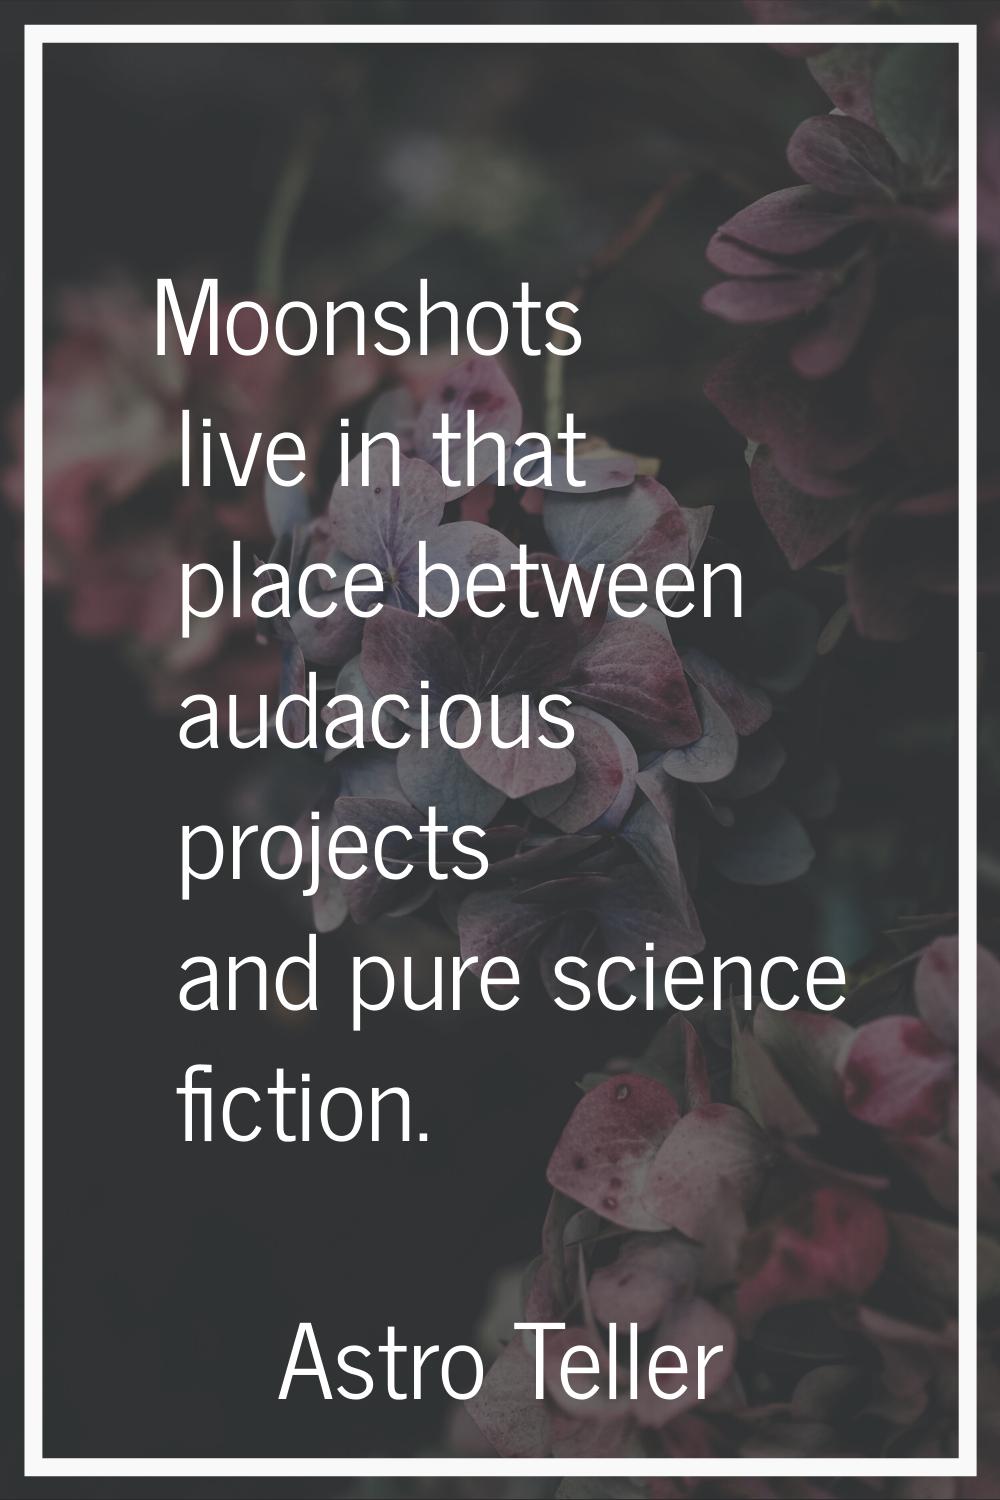 Moonshots live in that place between audacious projects and pure science fiction.